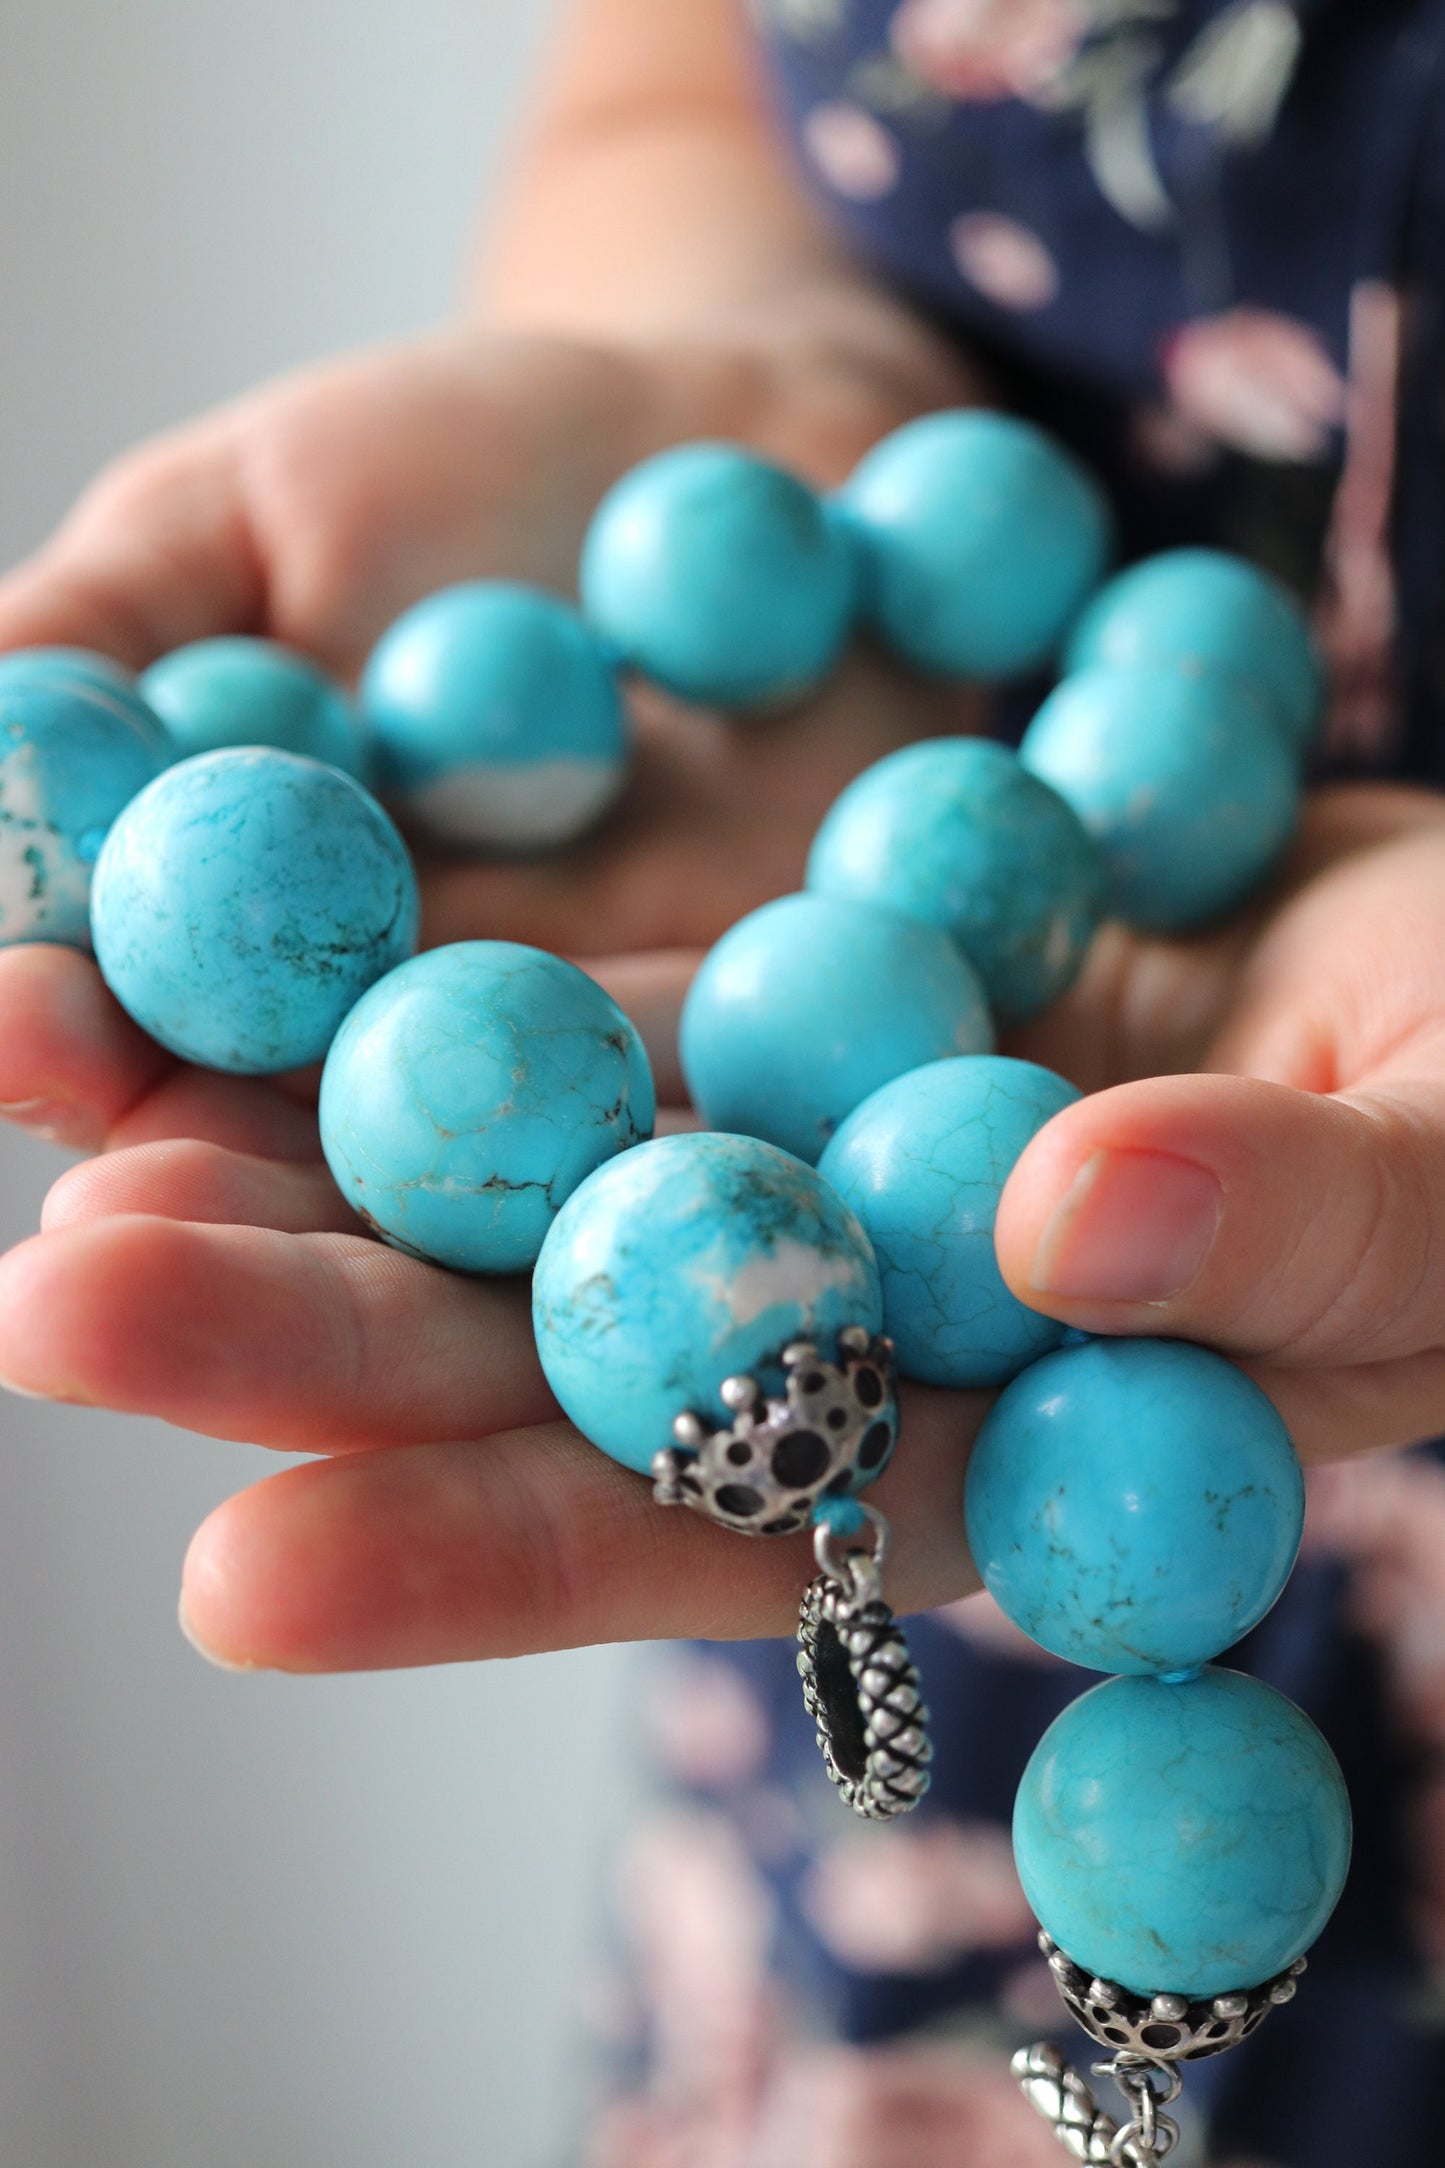 Dian Malouf Necklace. Round Turquoise Heavy sterling Silver Bead Necklace DLM Collection (st167)